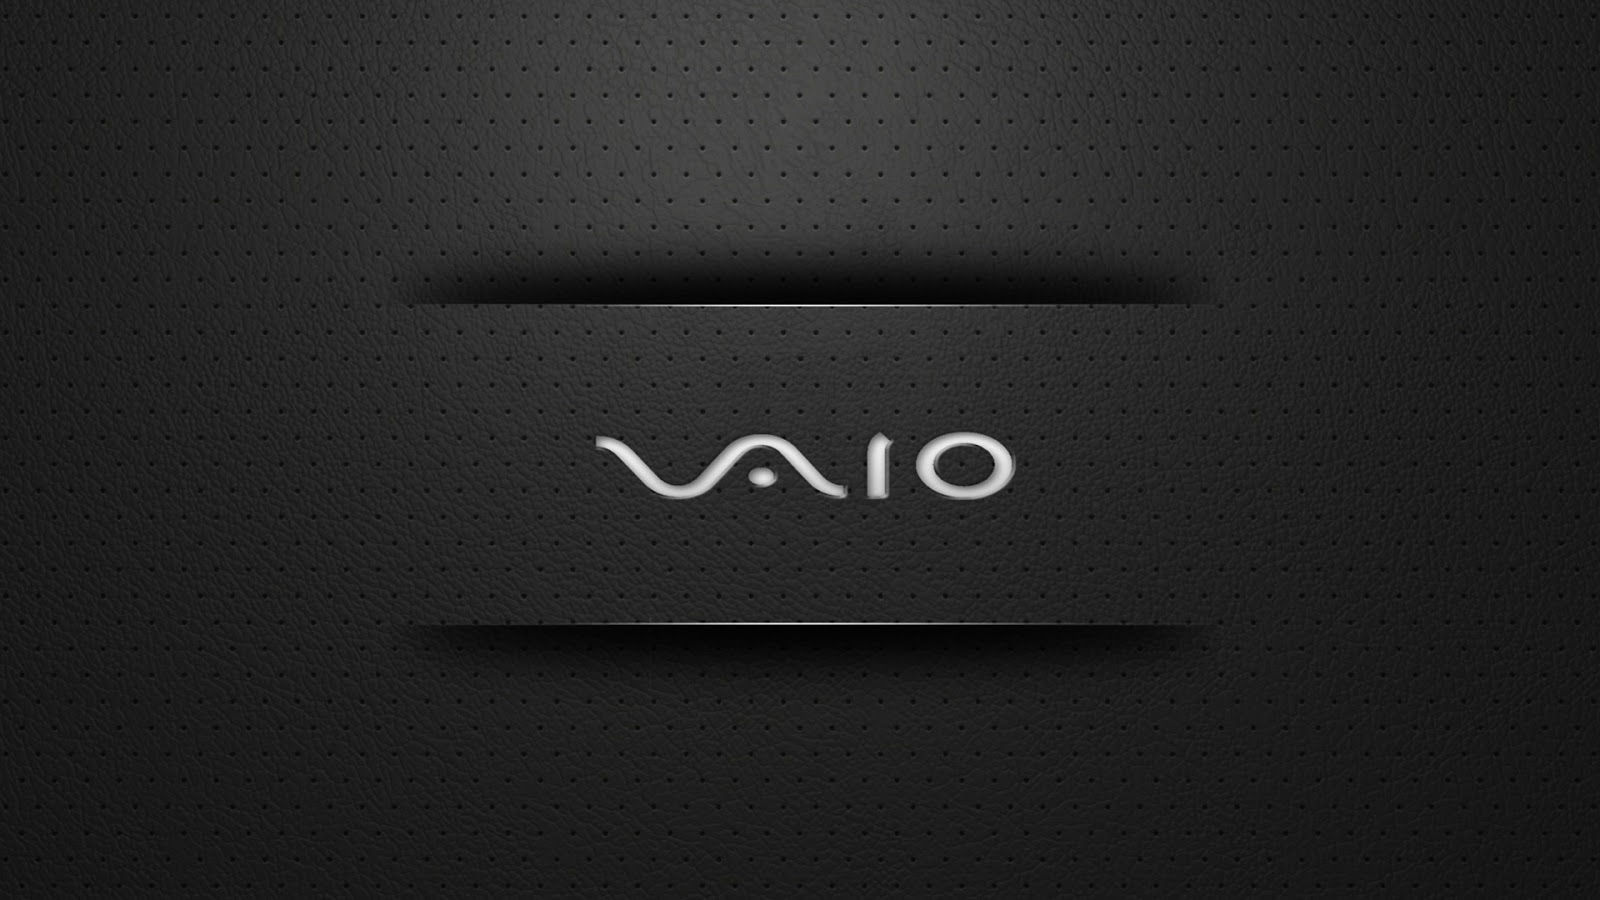 Sony Vaio  HD  wallpapers  HD  Wallpapers  High Definition  